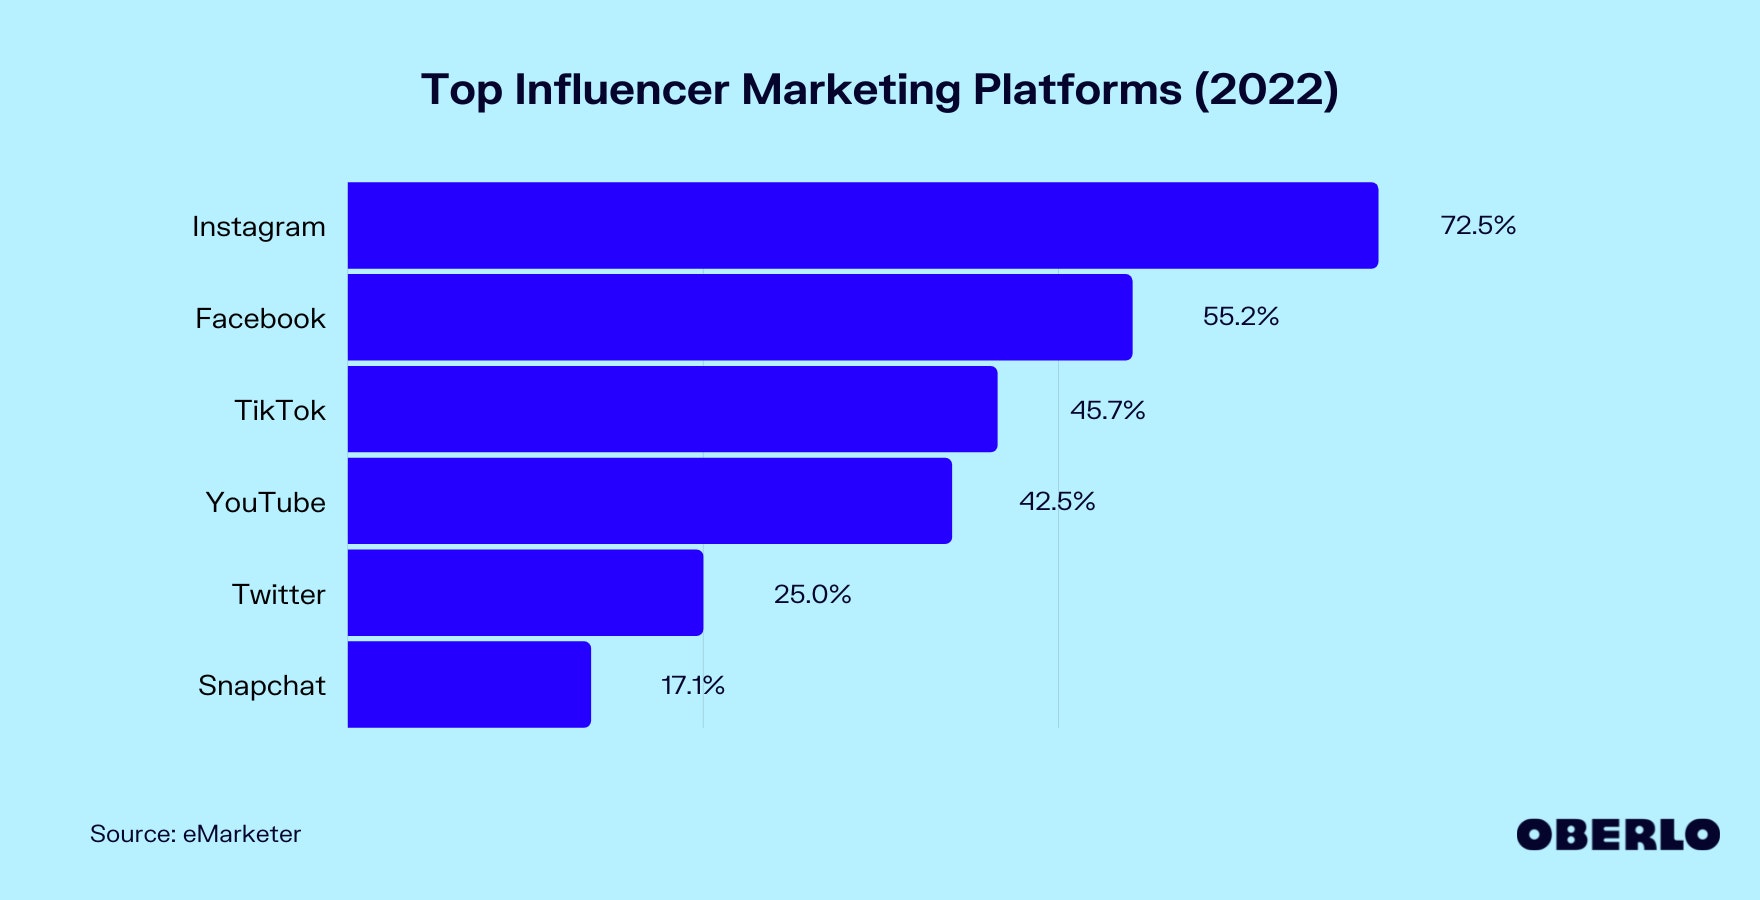 Chart of the Top Influencer Marketing Platforms